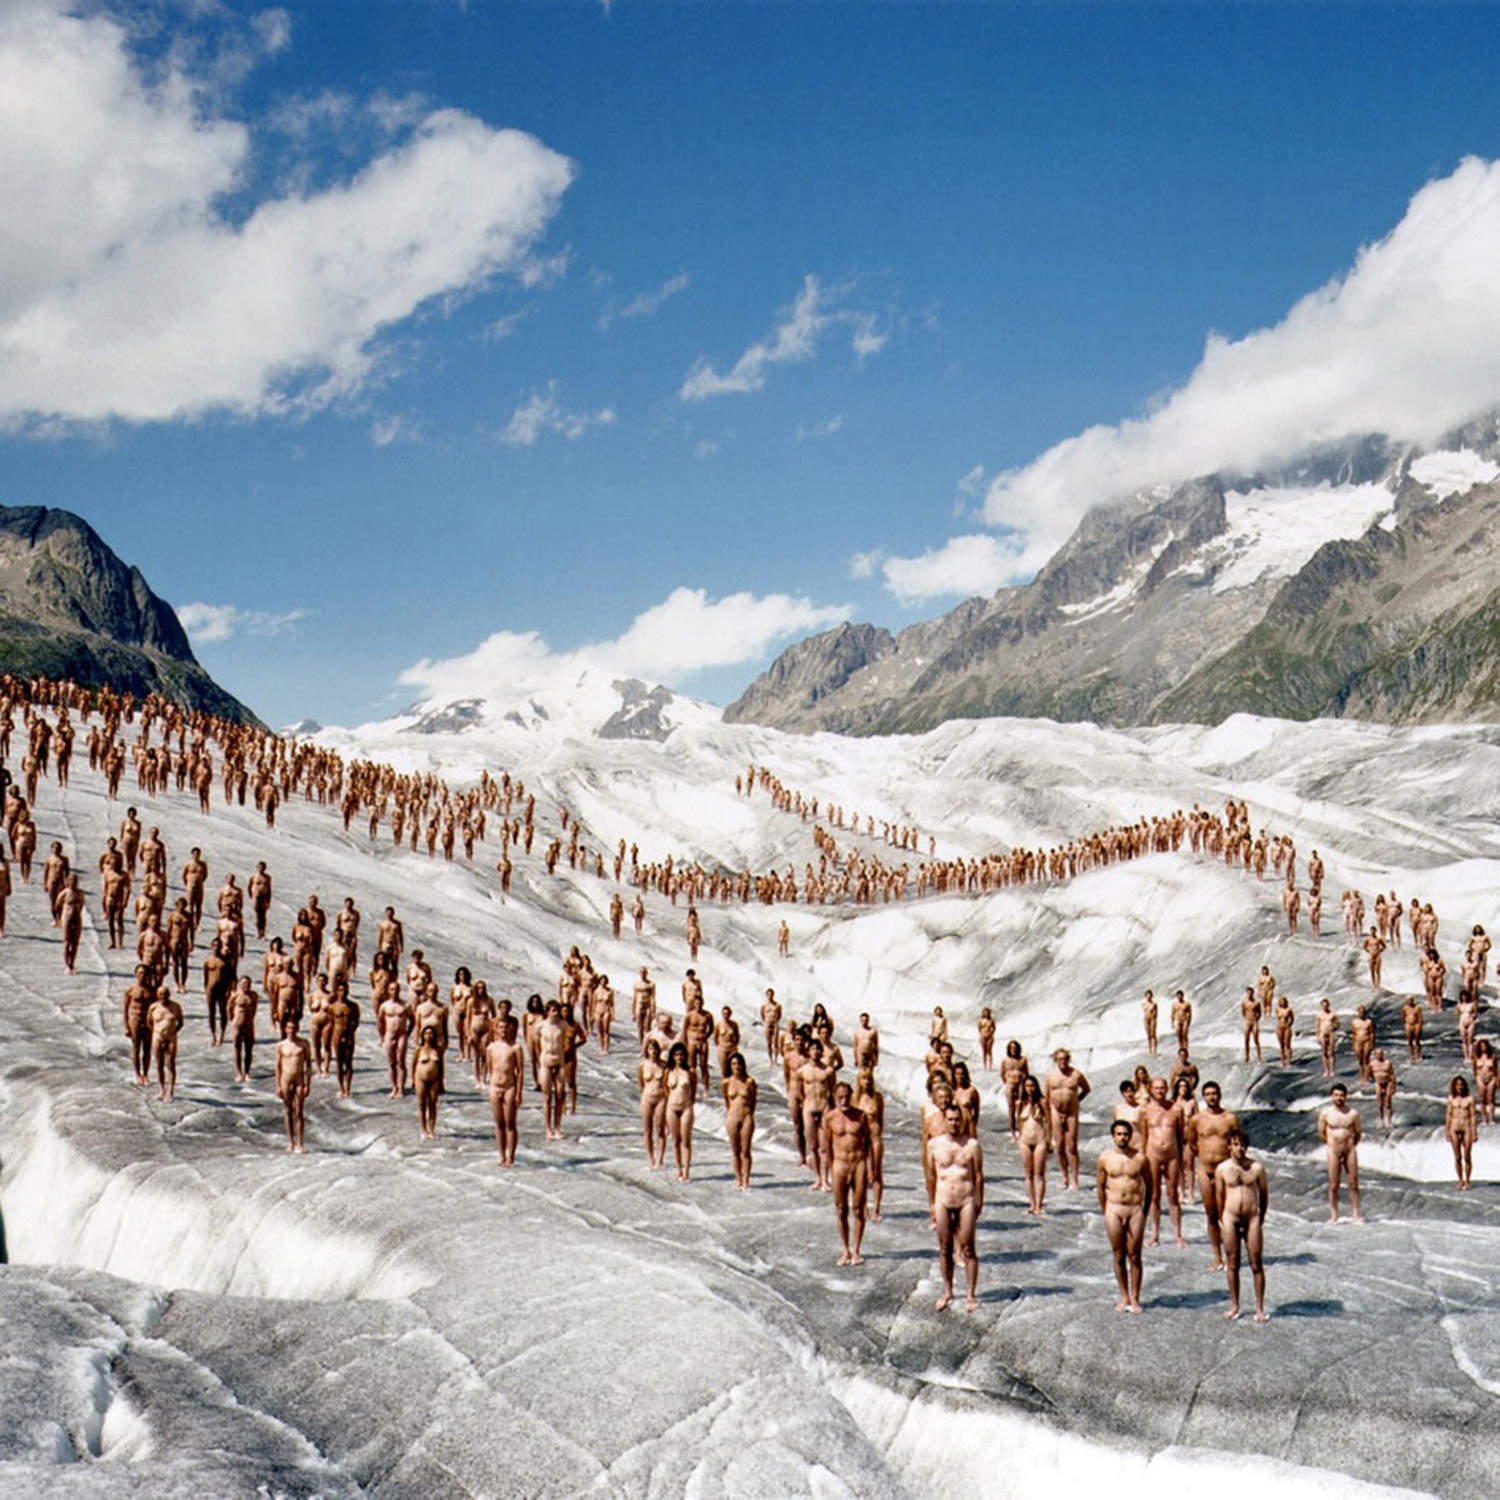 Spencer Tunick - nude body installation on arctic mountainside